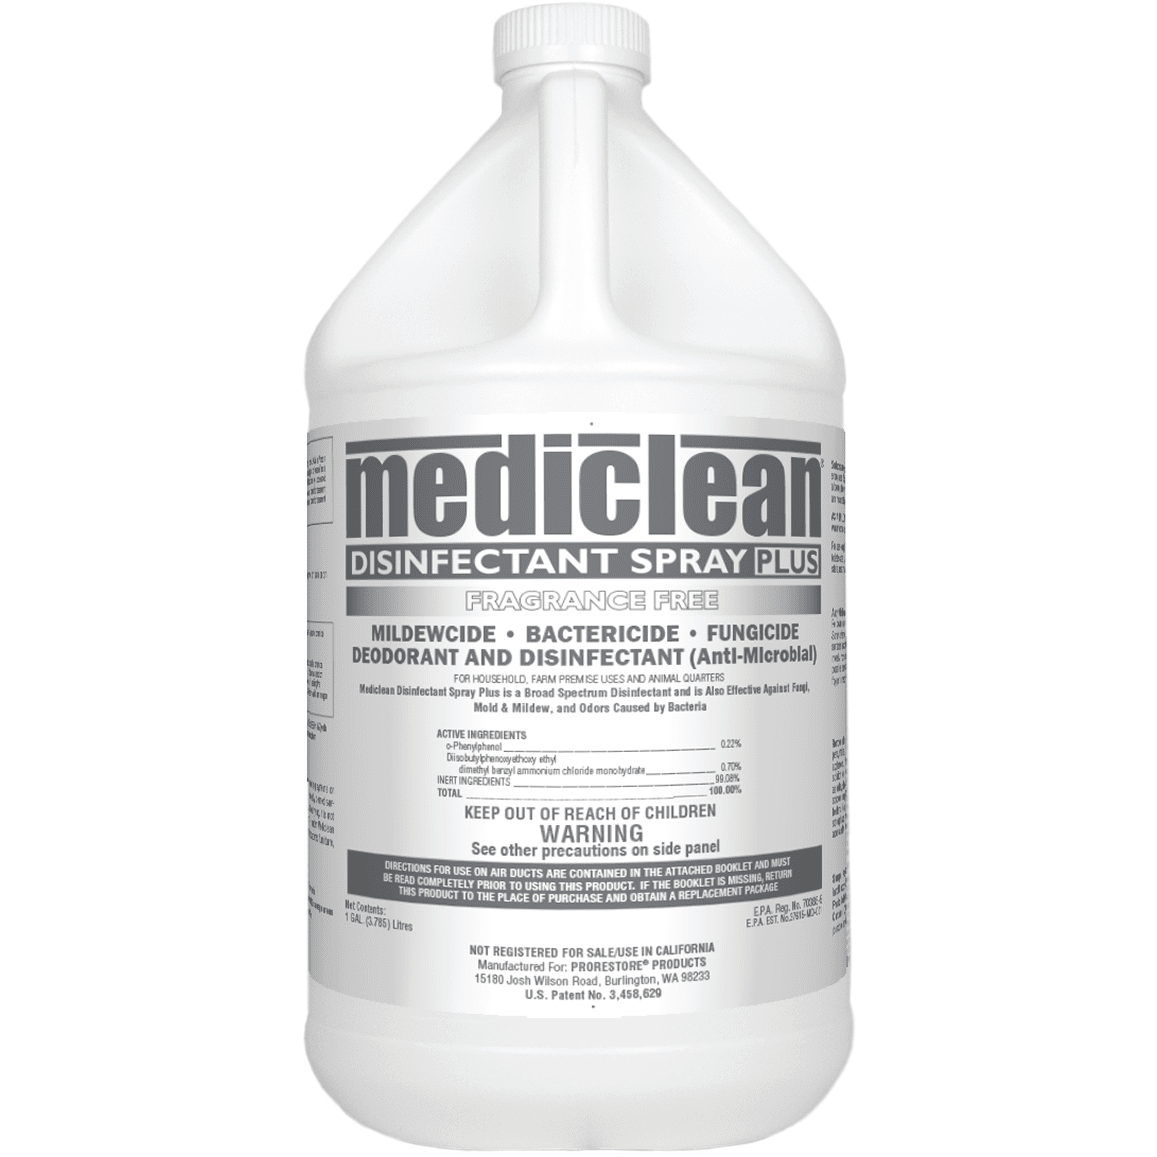 MediClean Disinfectant Spray Plus (FRAGRANCE FREE)- Case of 4